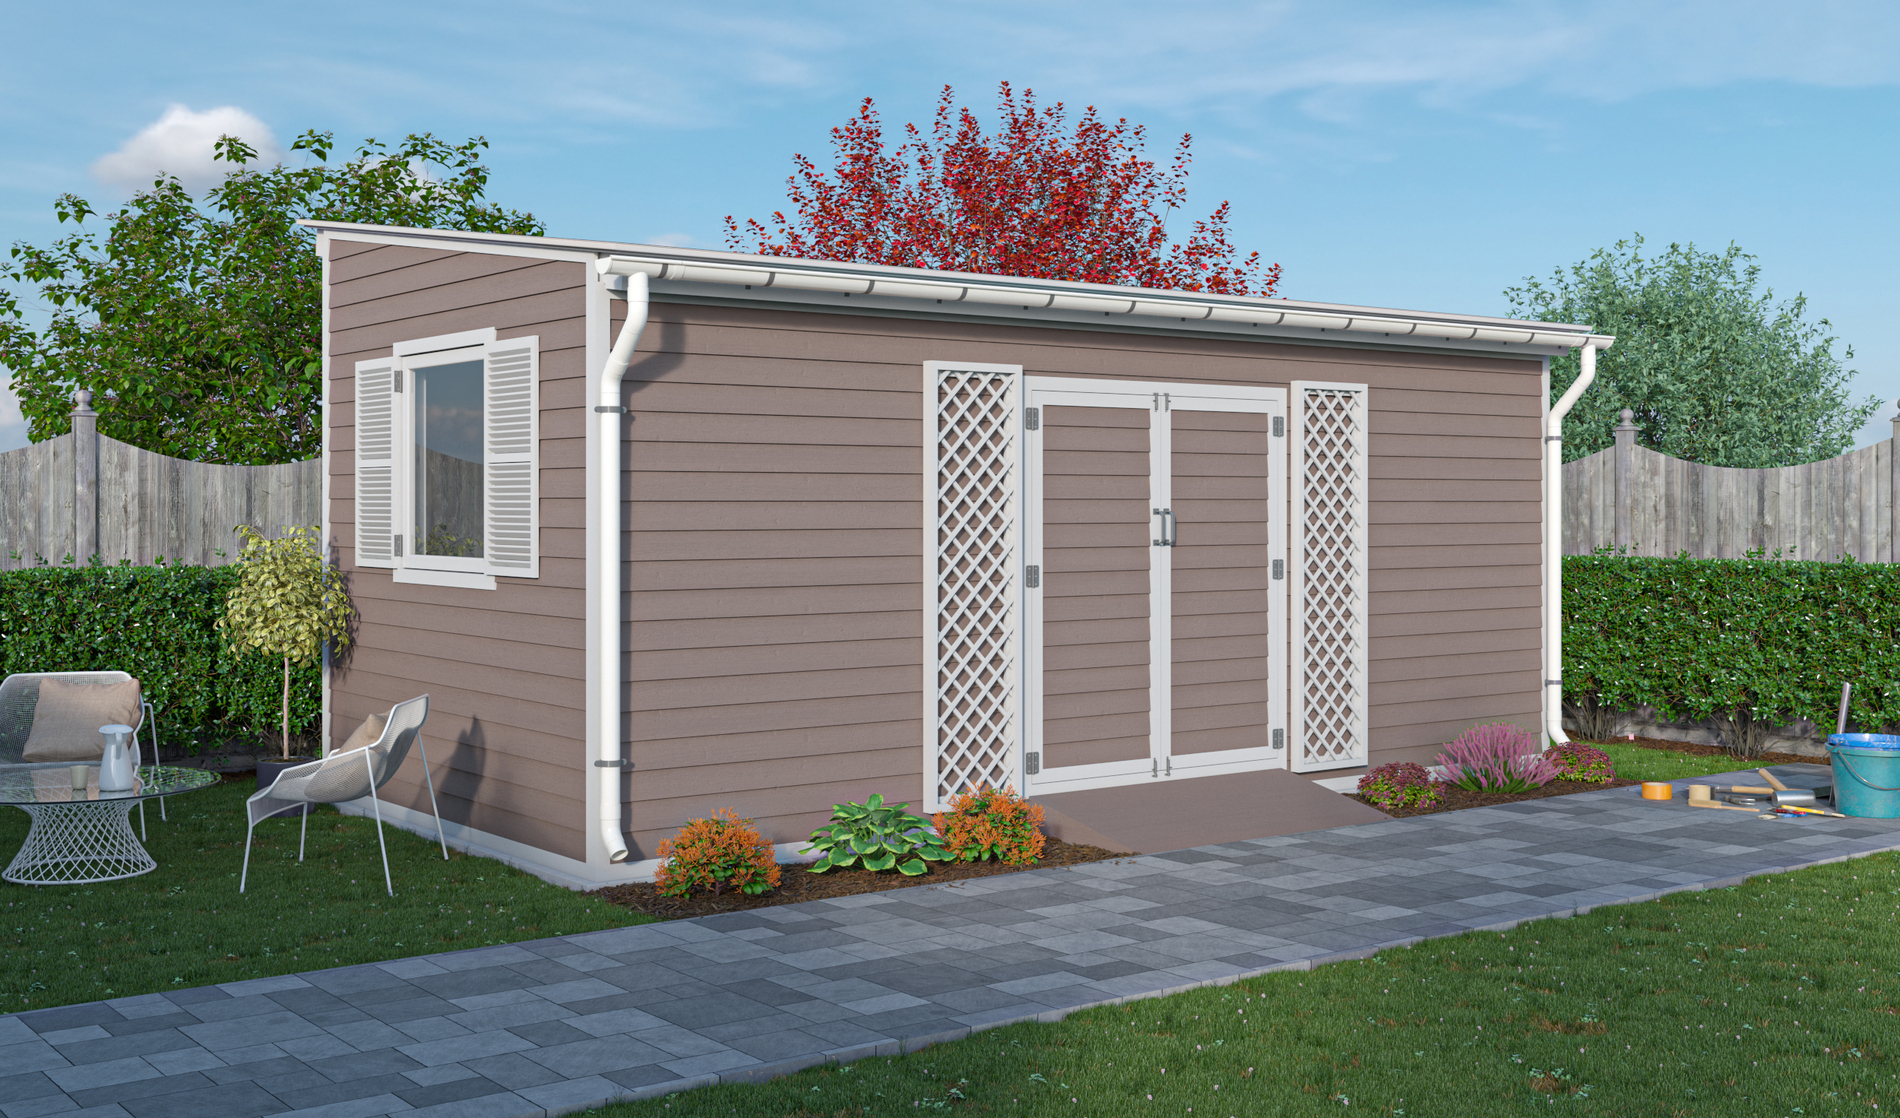 10x20 lean to garden shed preview